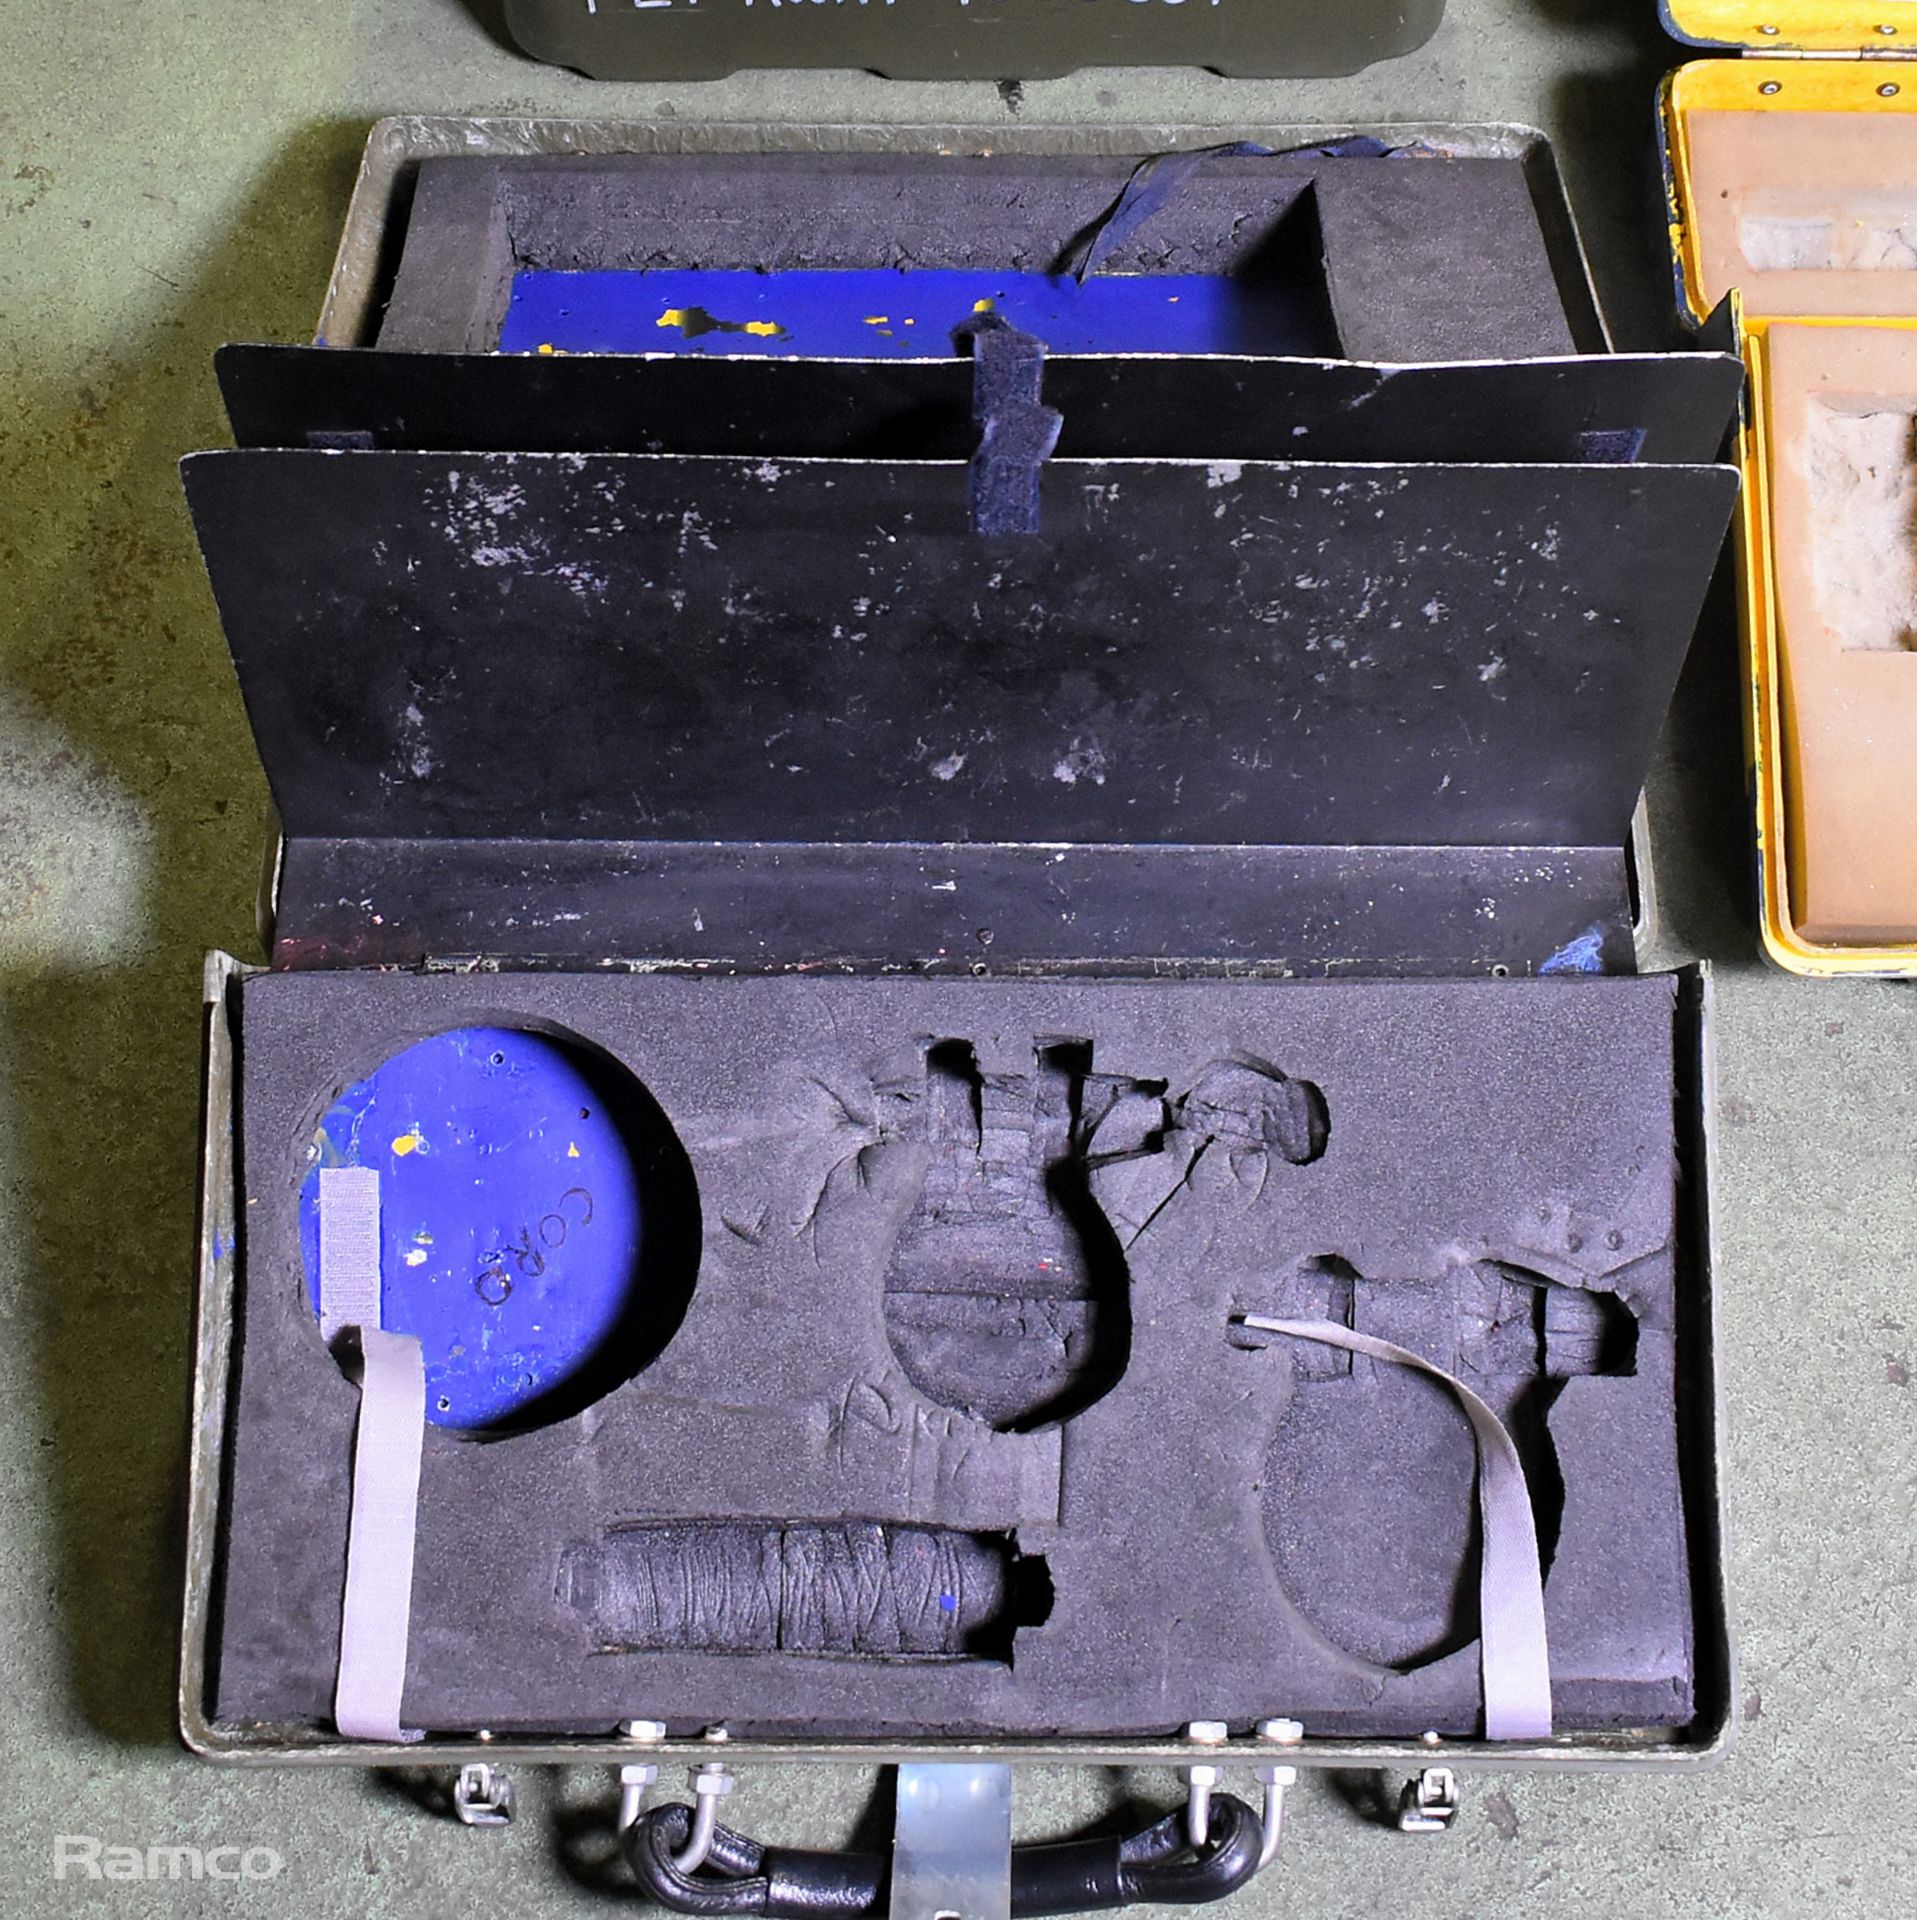 Multiple piece tool kit in foam trays - spanners, screwdrivers, hammers, pliers - Image 3 of 15